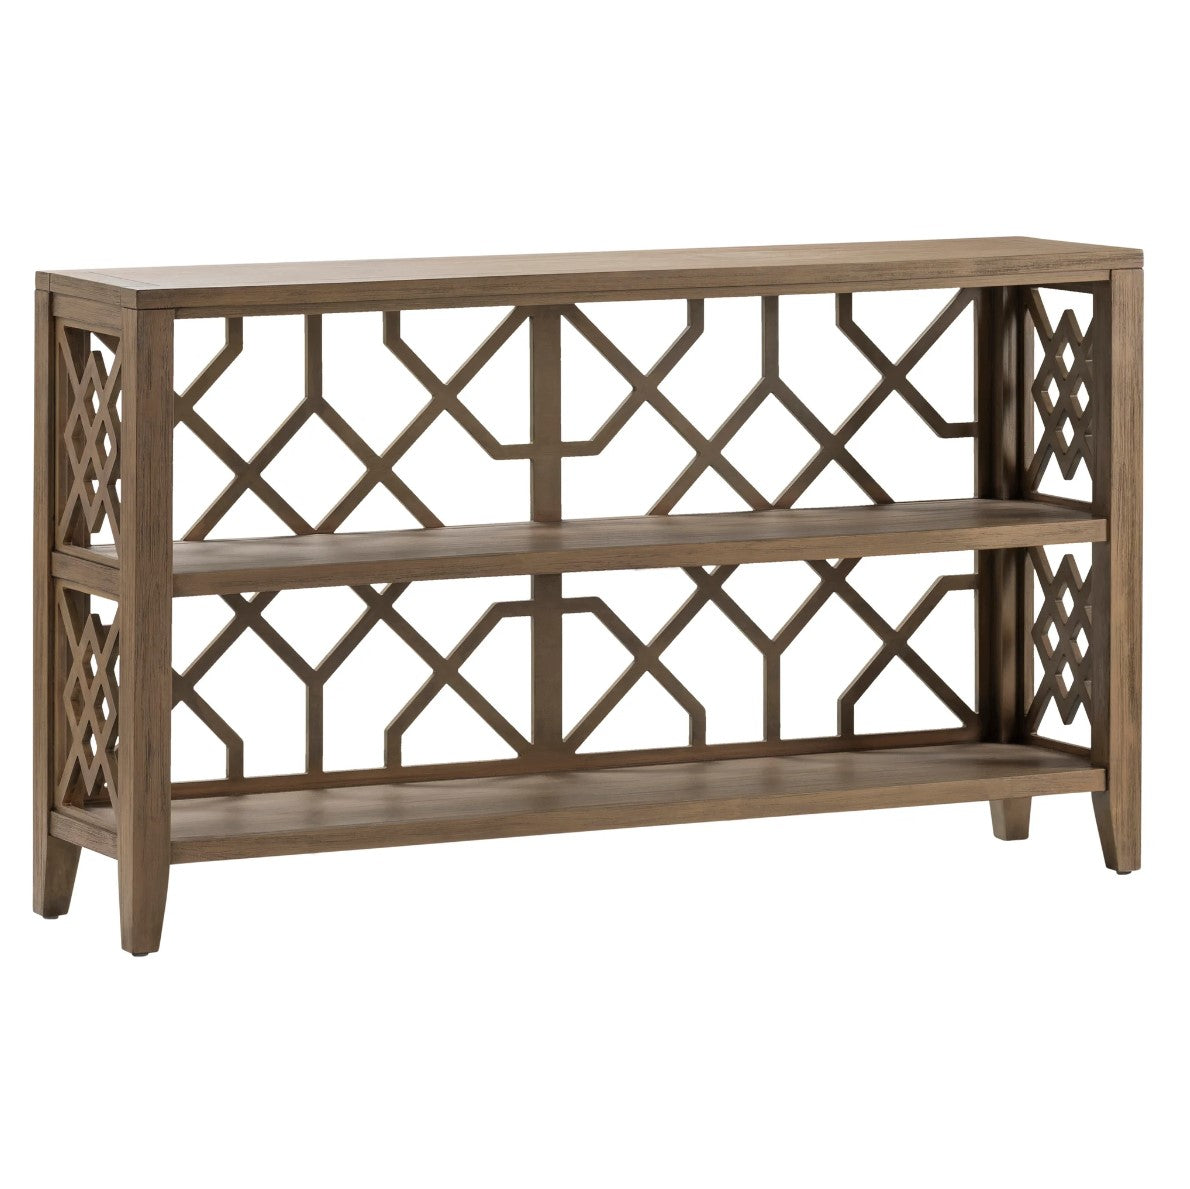 Crestview Collection Hawthorne Estate 56" x 13" x 32" Traditional Wood Open Fretwork Console In Dayton Finish